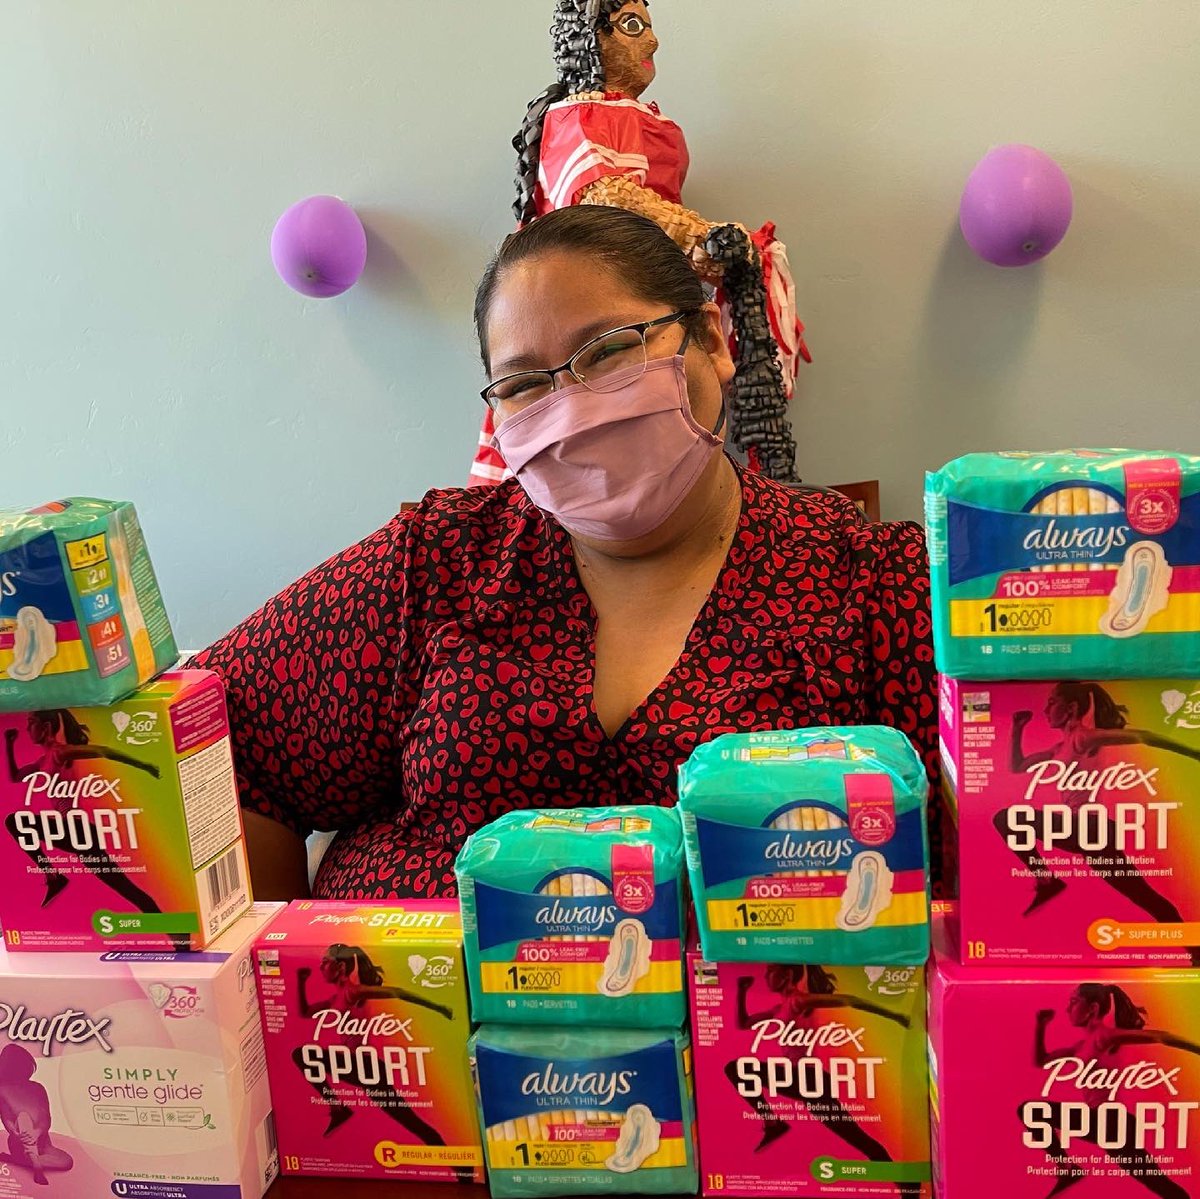 This gonna be me all week on Zooms in honor of #PeriodPovertyAwarenessWeek 

My office is accepting donations at 240 N Stone which will go to the @diaperbanksaz visit AdelitaSGrijalva.com to find more drop off locations. We need every size pads, tampons or cups!